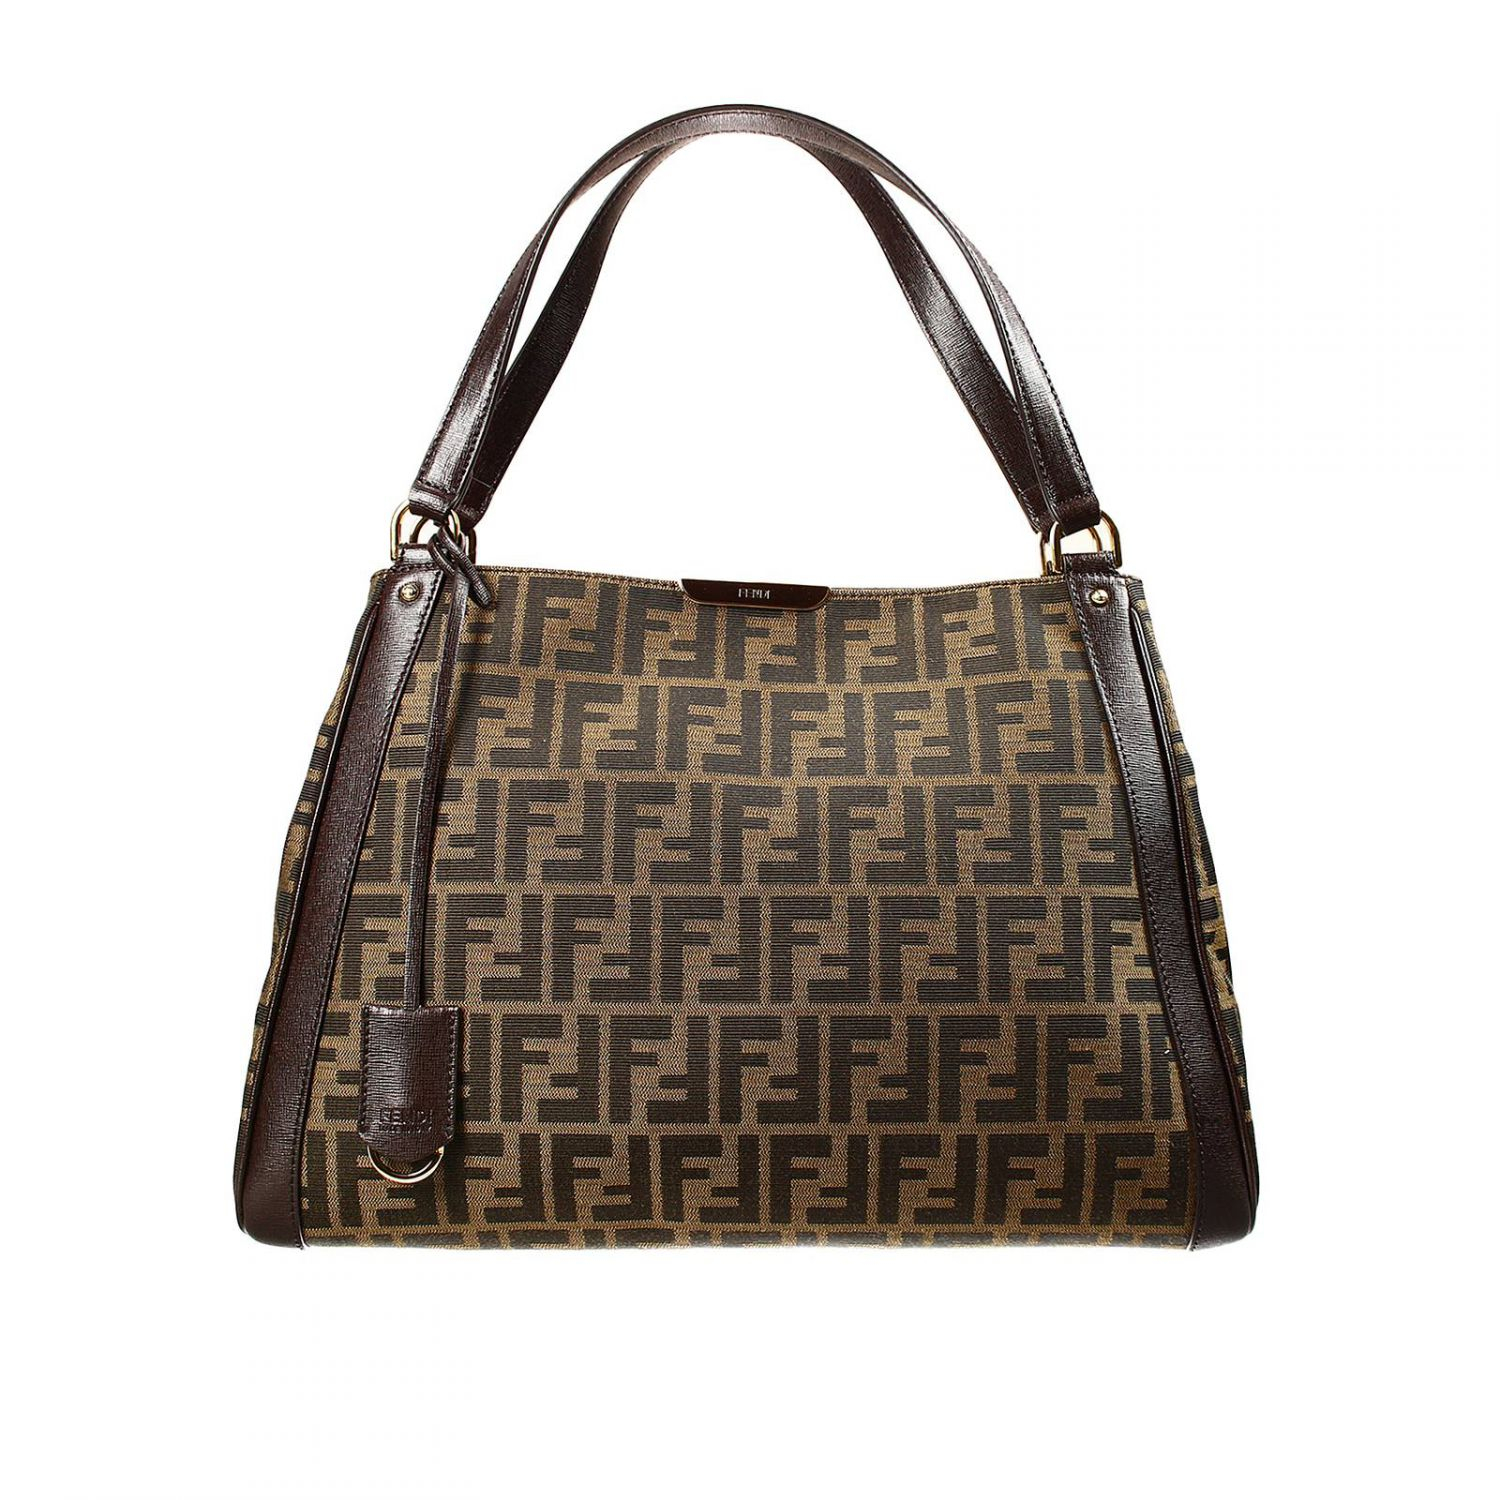 Fendi Handbag Zucca Shopping Bag With Contrast in Brown - Lyst